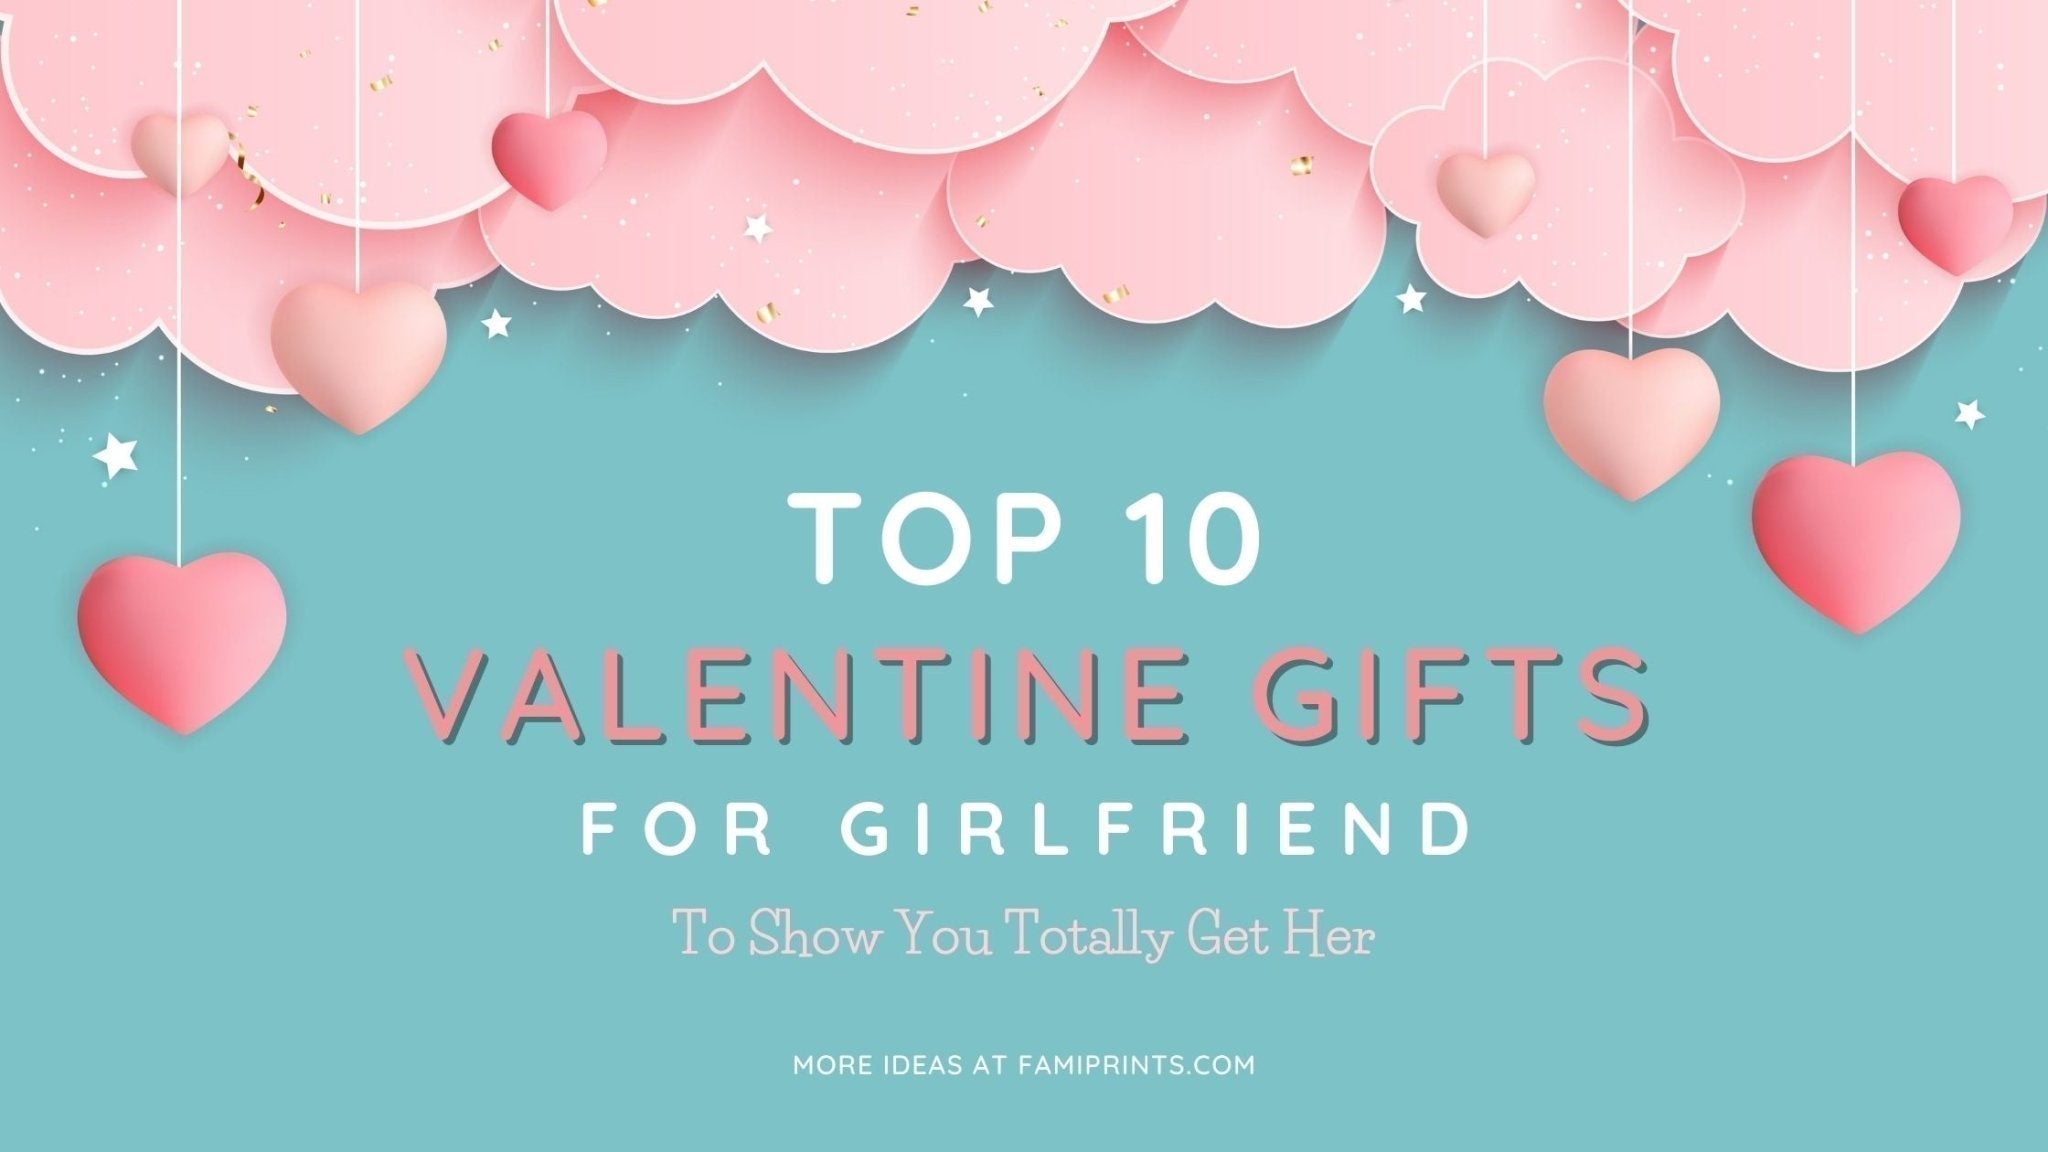 Top 10 Valentine Gifts for Girlfriend Sure to Love